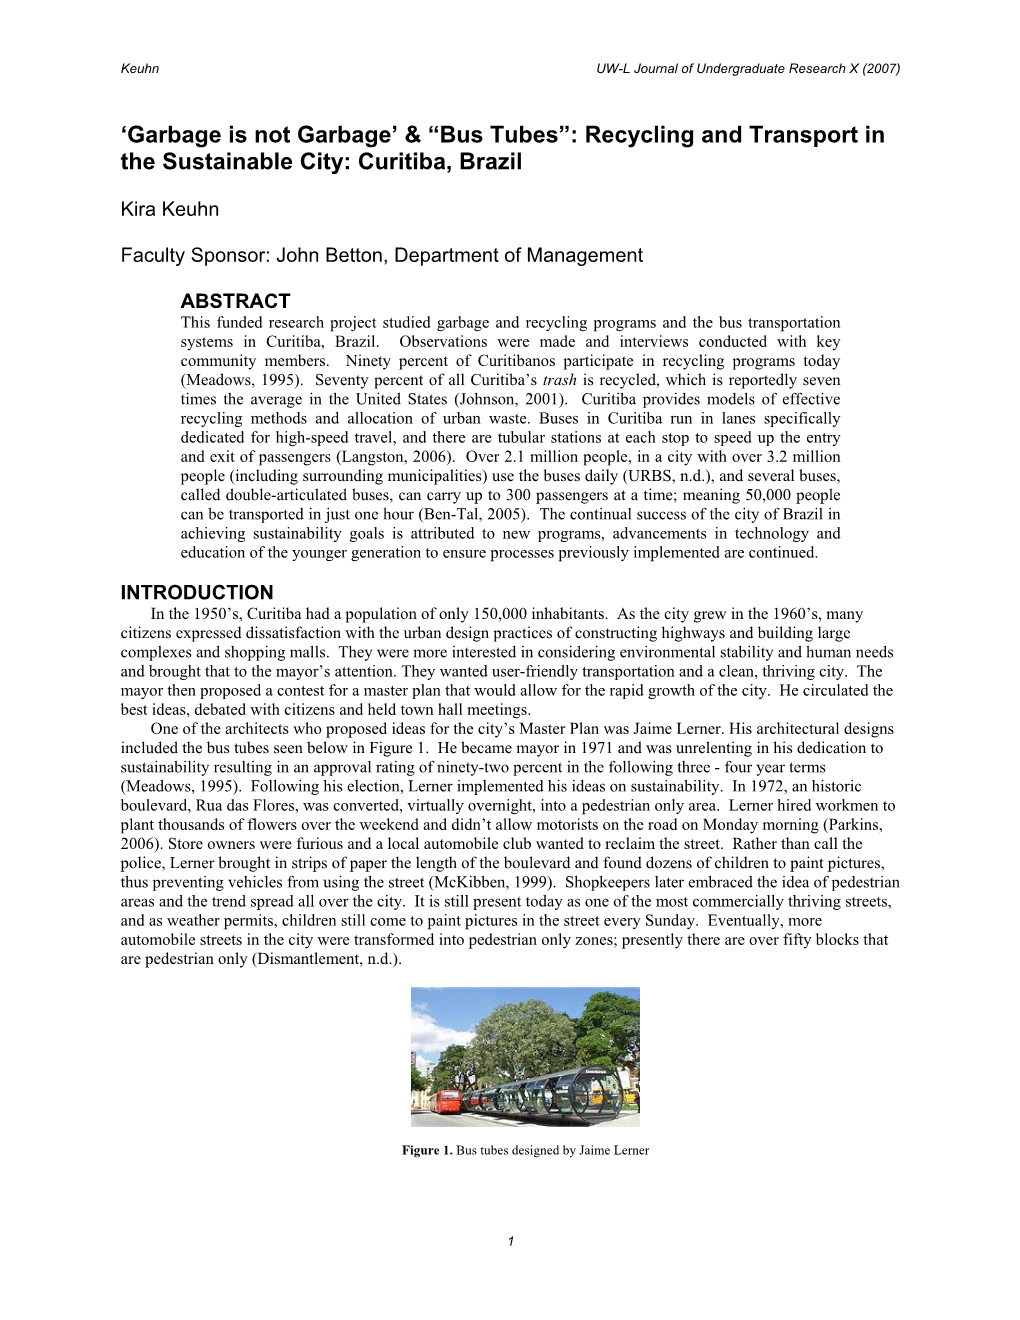 Recycling and Transport in the Sustainable City: Curitiba, Brazil